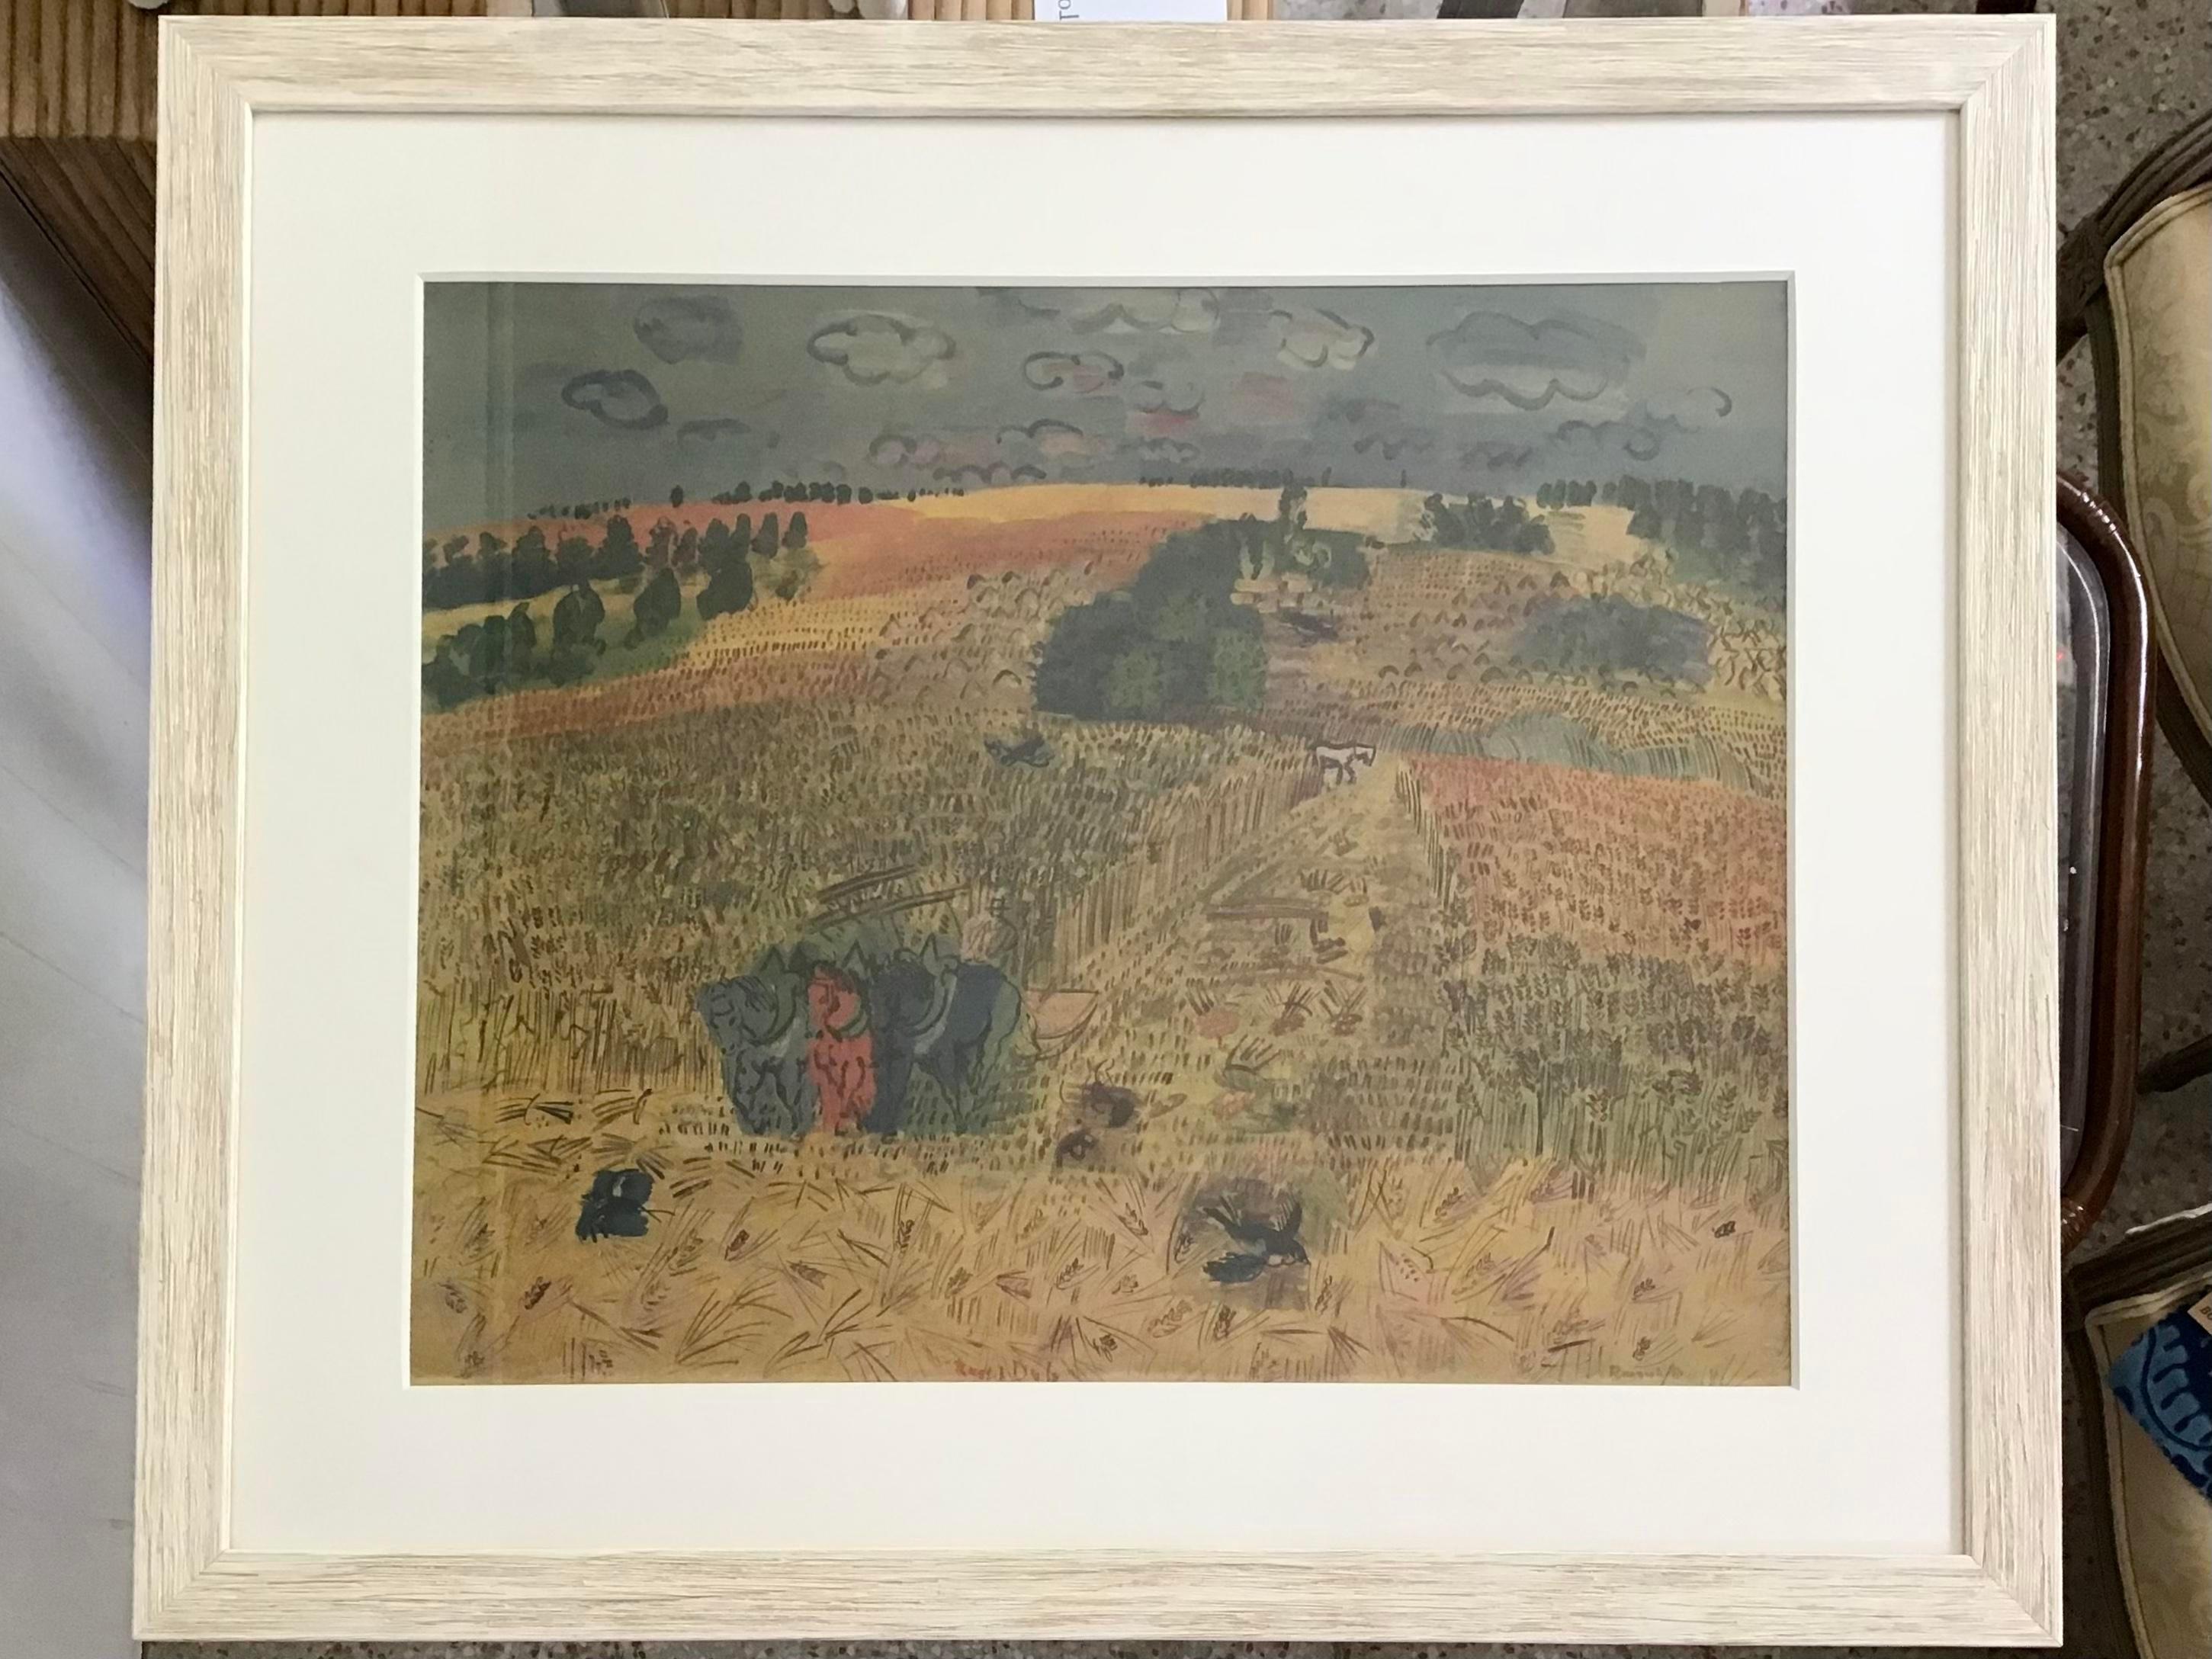 Gorgeous Normandy scene by Raoul Dufy. Lovely field of Normandy wheat. This lithograph has incredible color details and the white washed frame is elegant and simple with new matte.